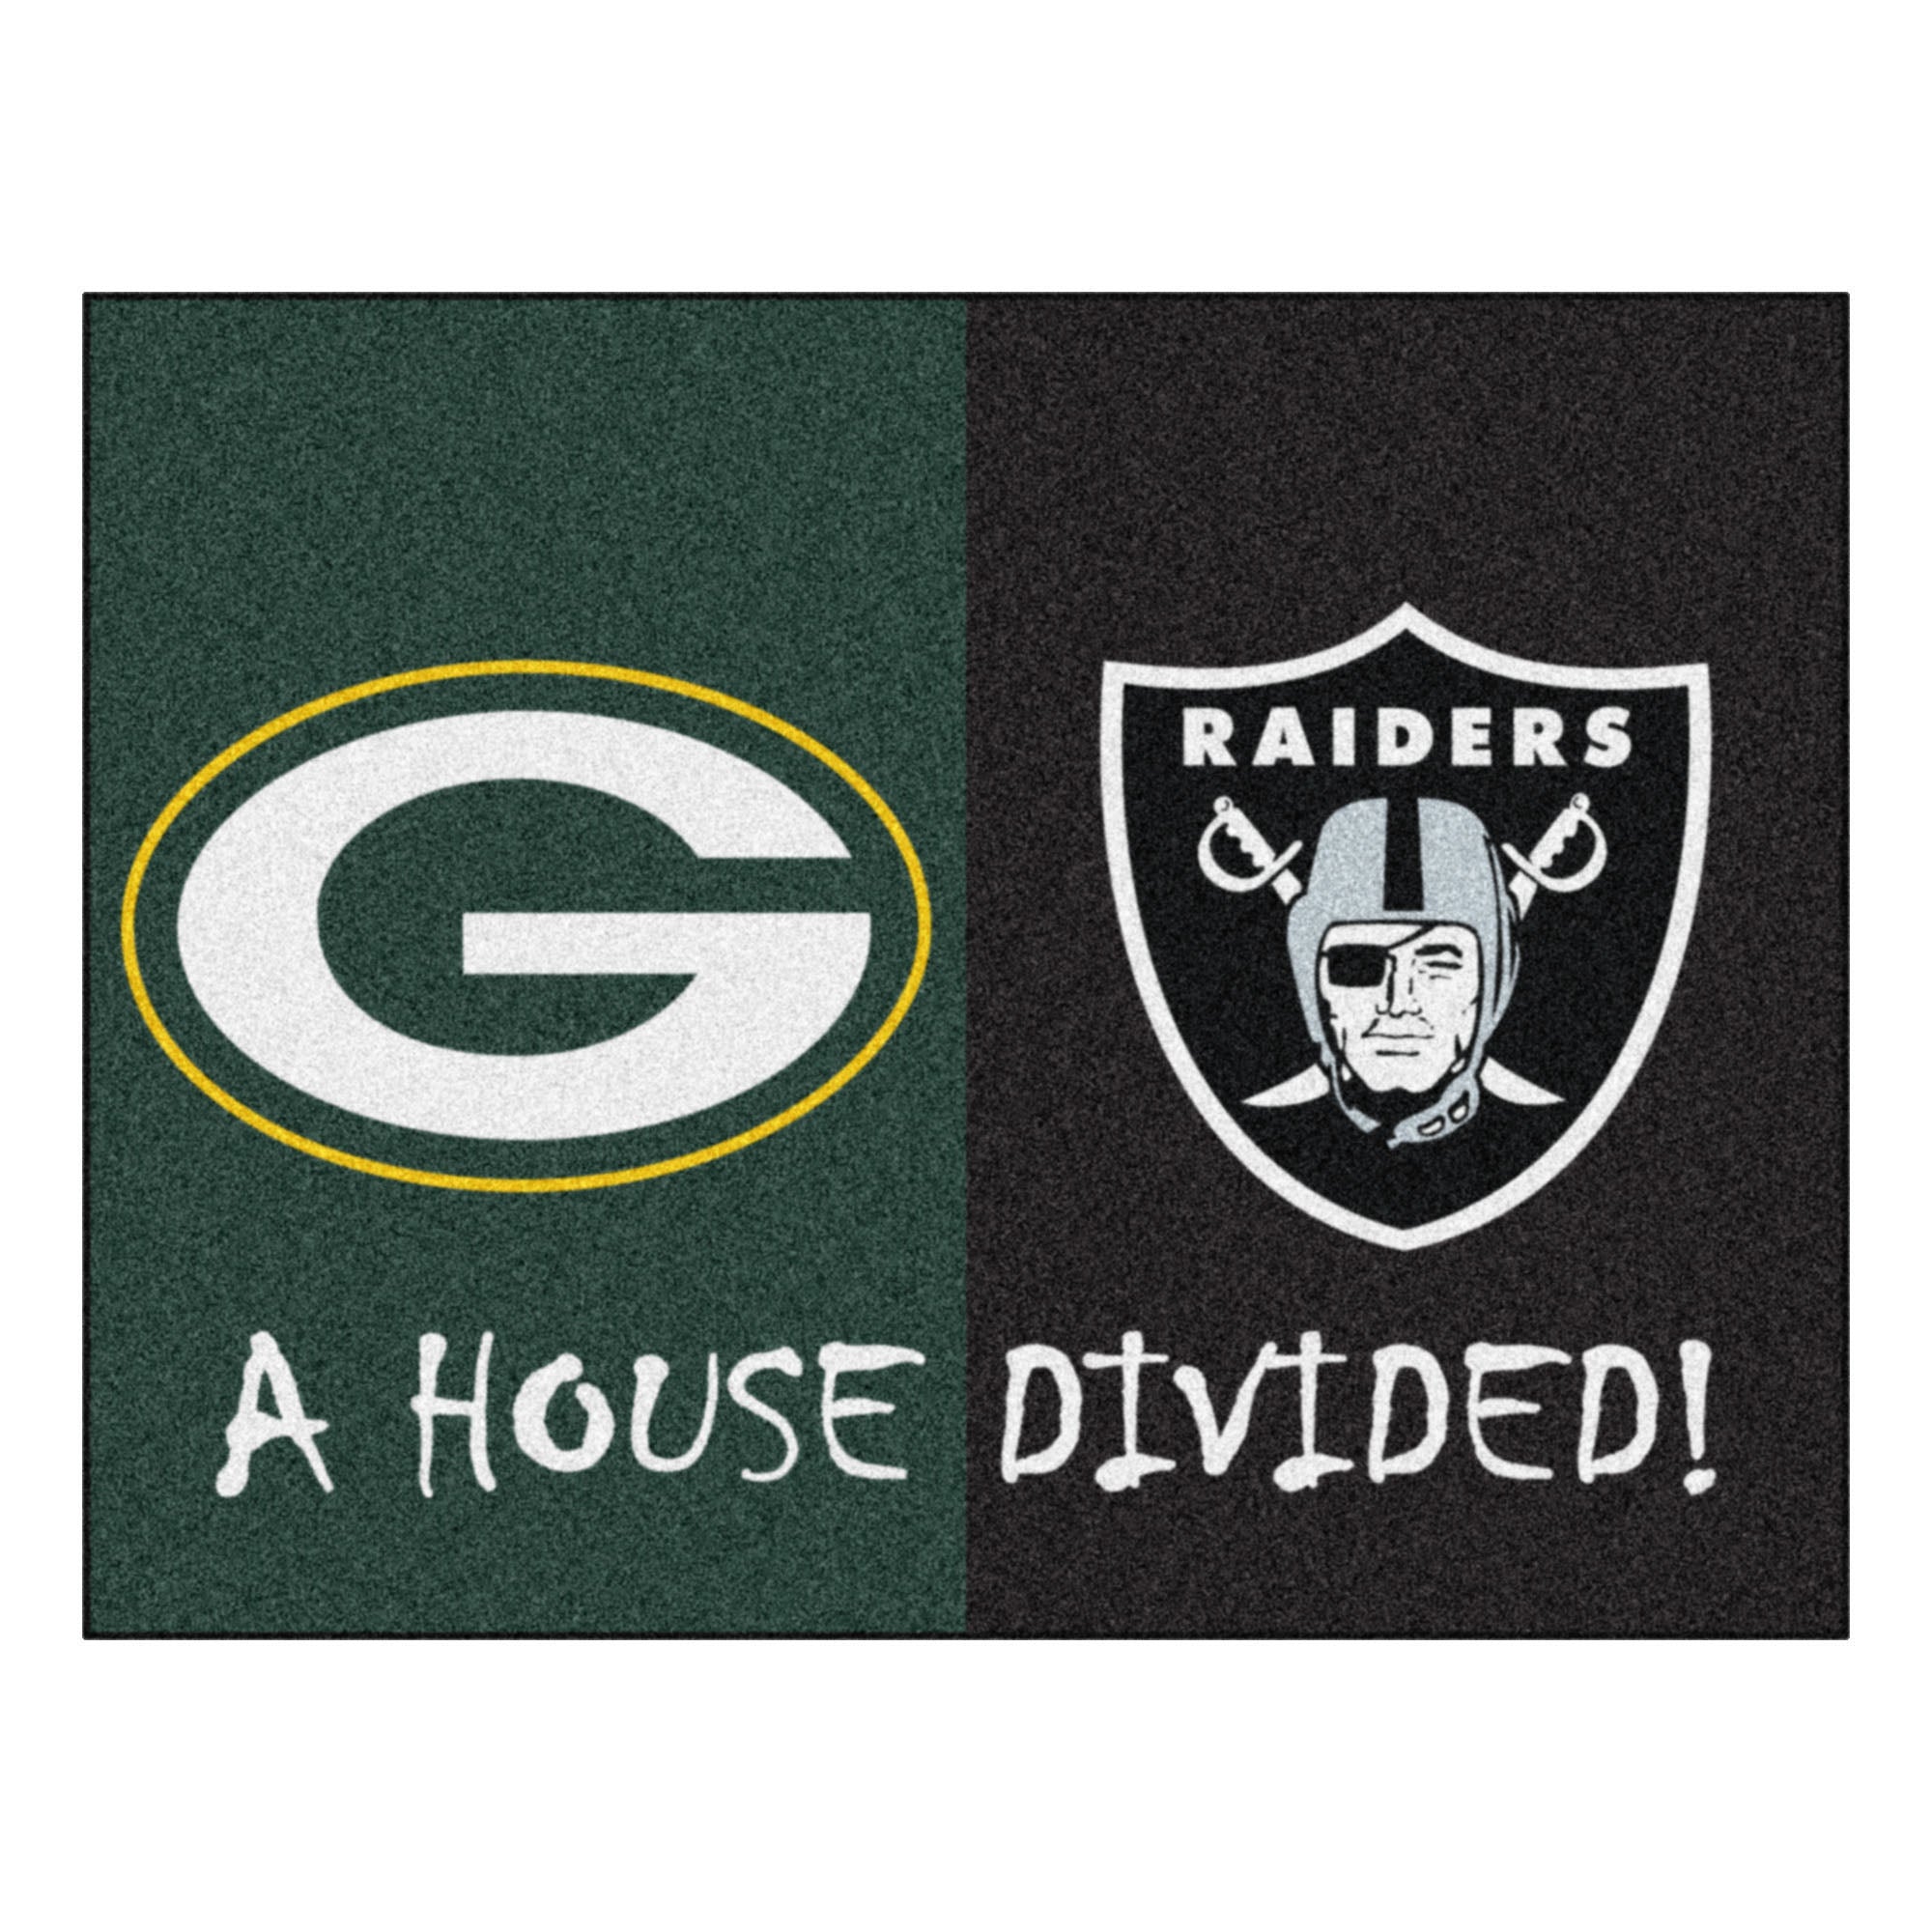 NFL House Divided - Packers / Raiders House Divided Mat